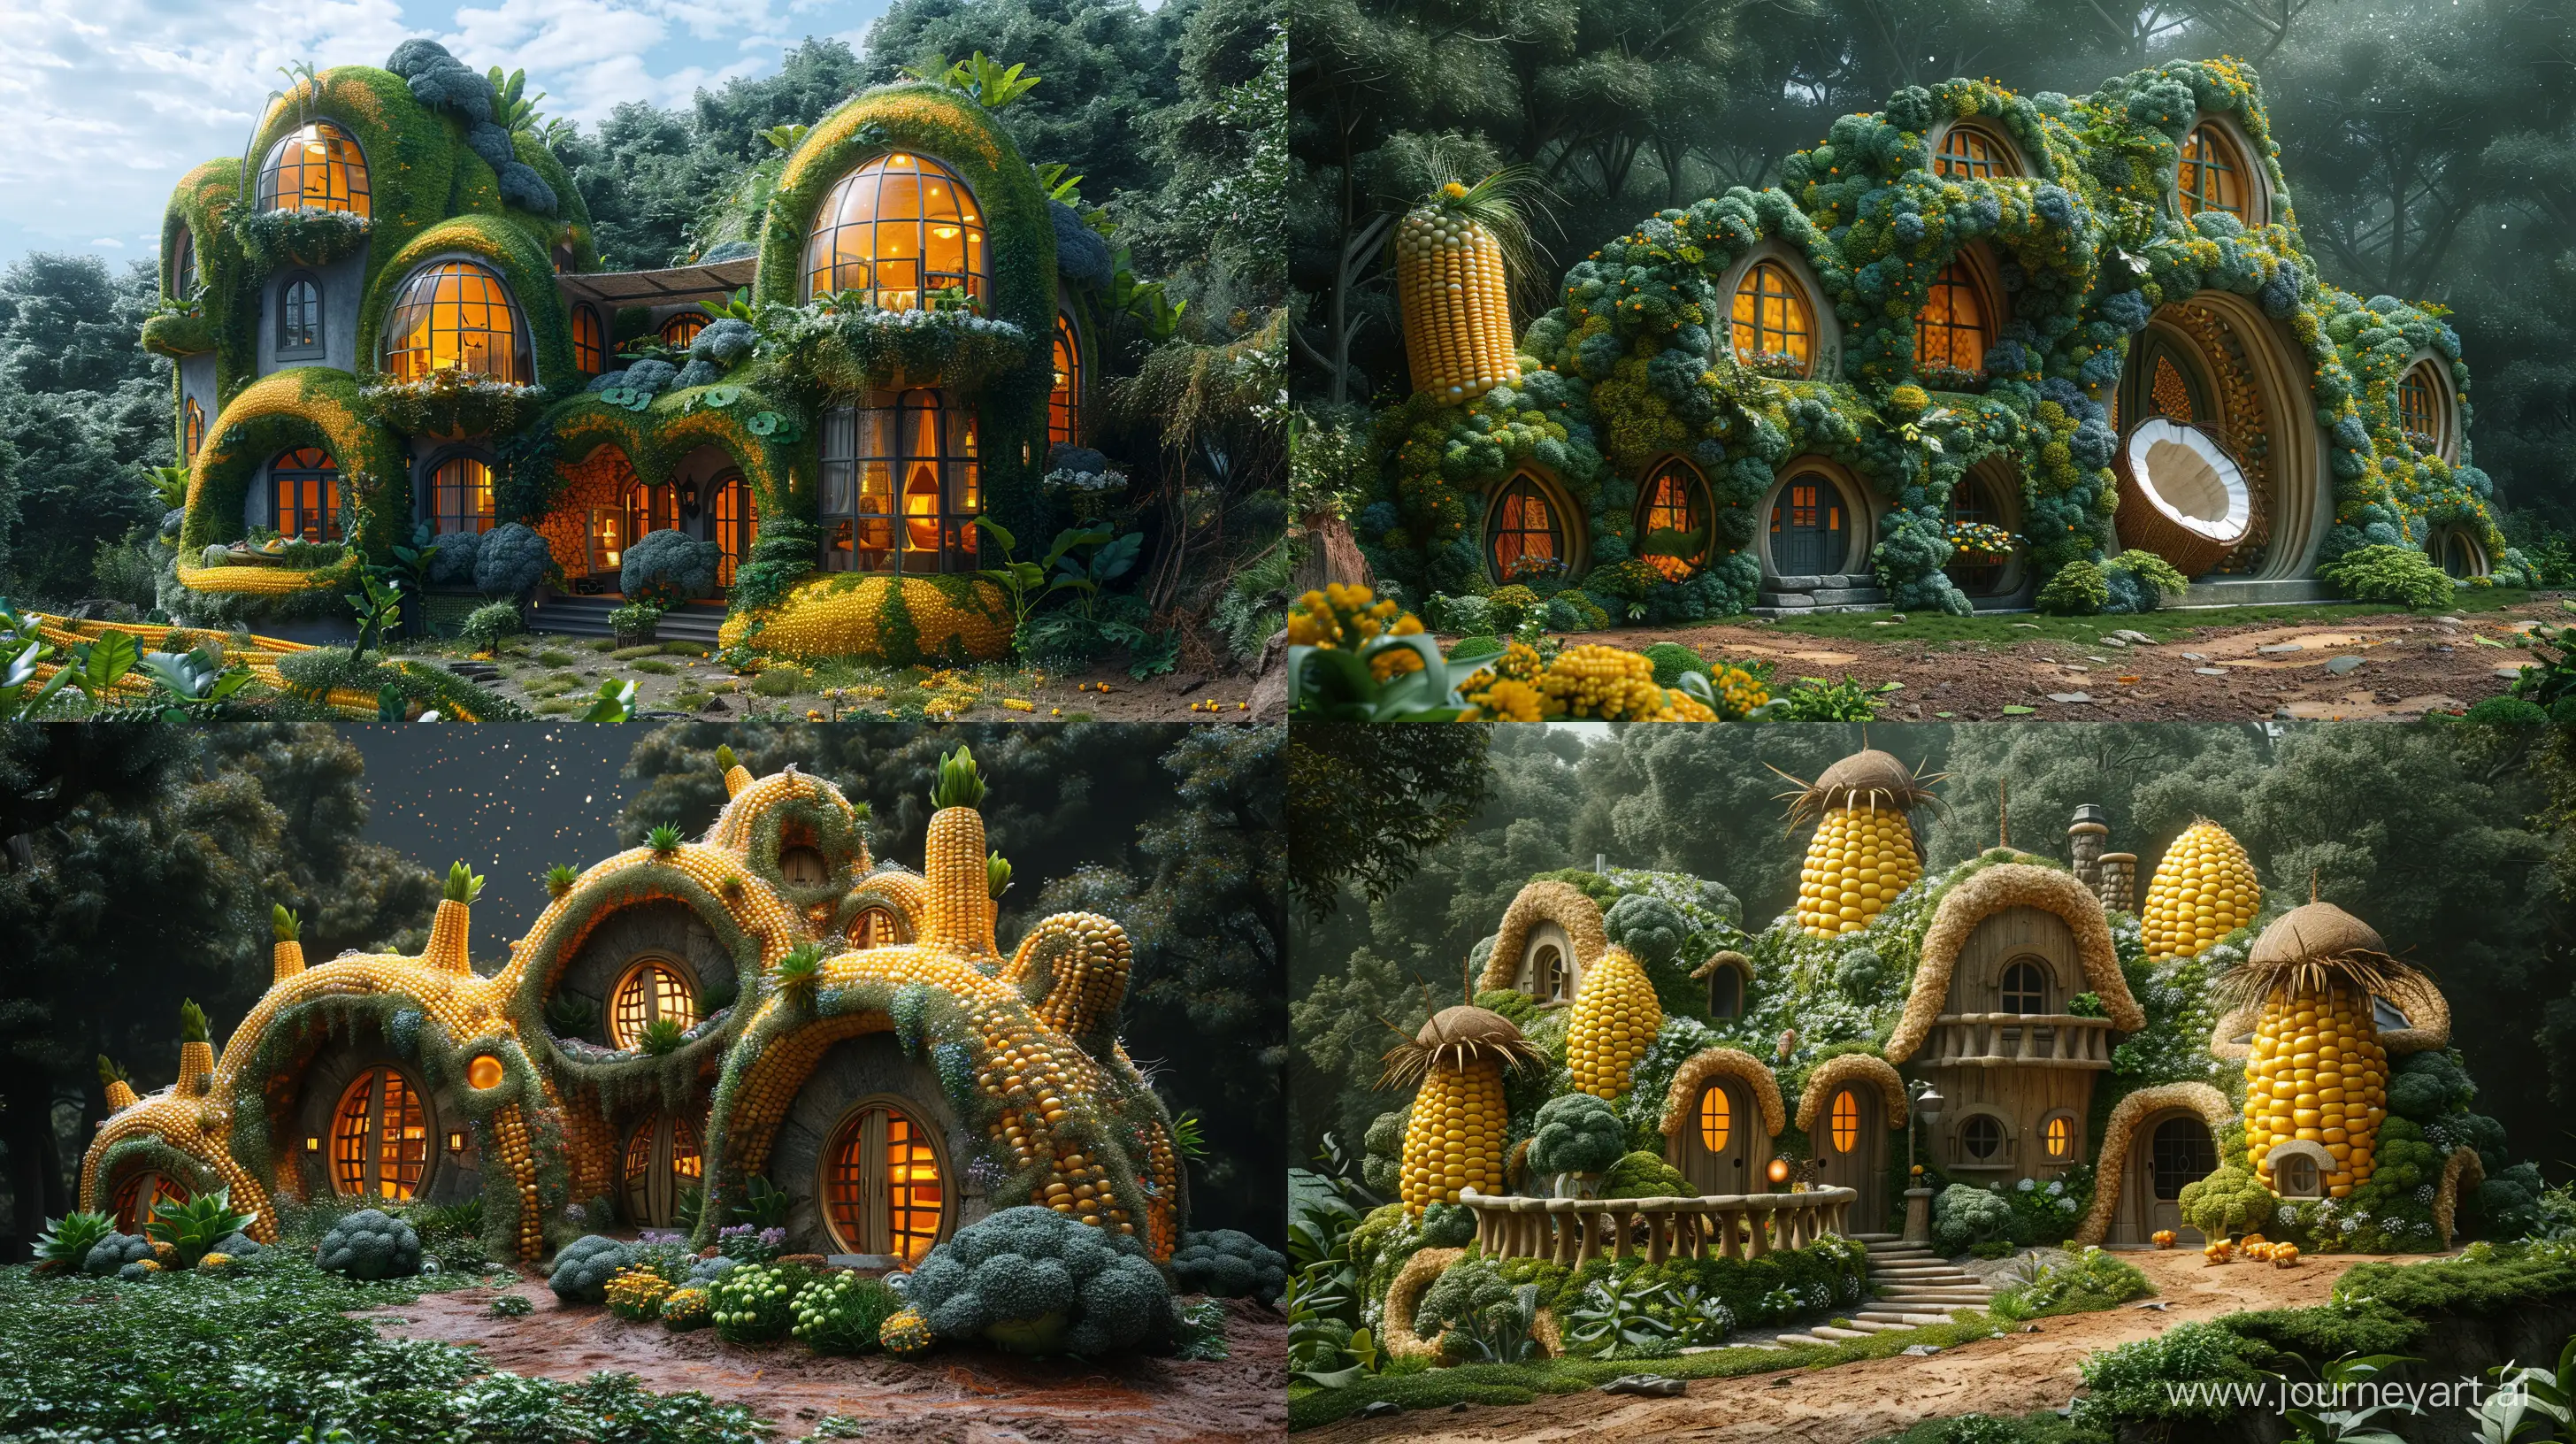 Extraterrestrial-Luxury-Galaxy-Fantasy-House-Shaped-like-Corn-Coconut-and-Broccoli